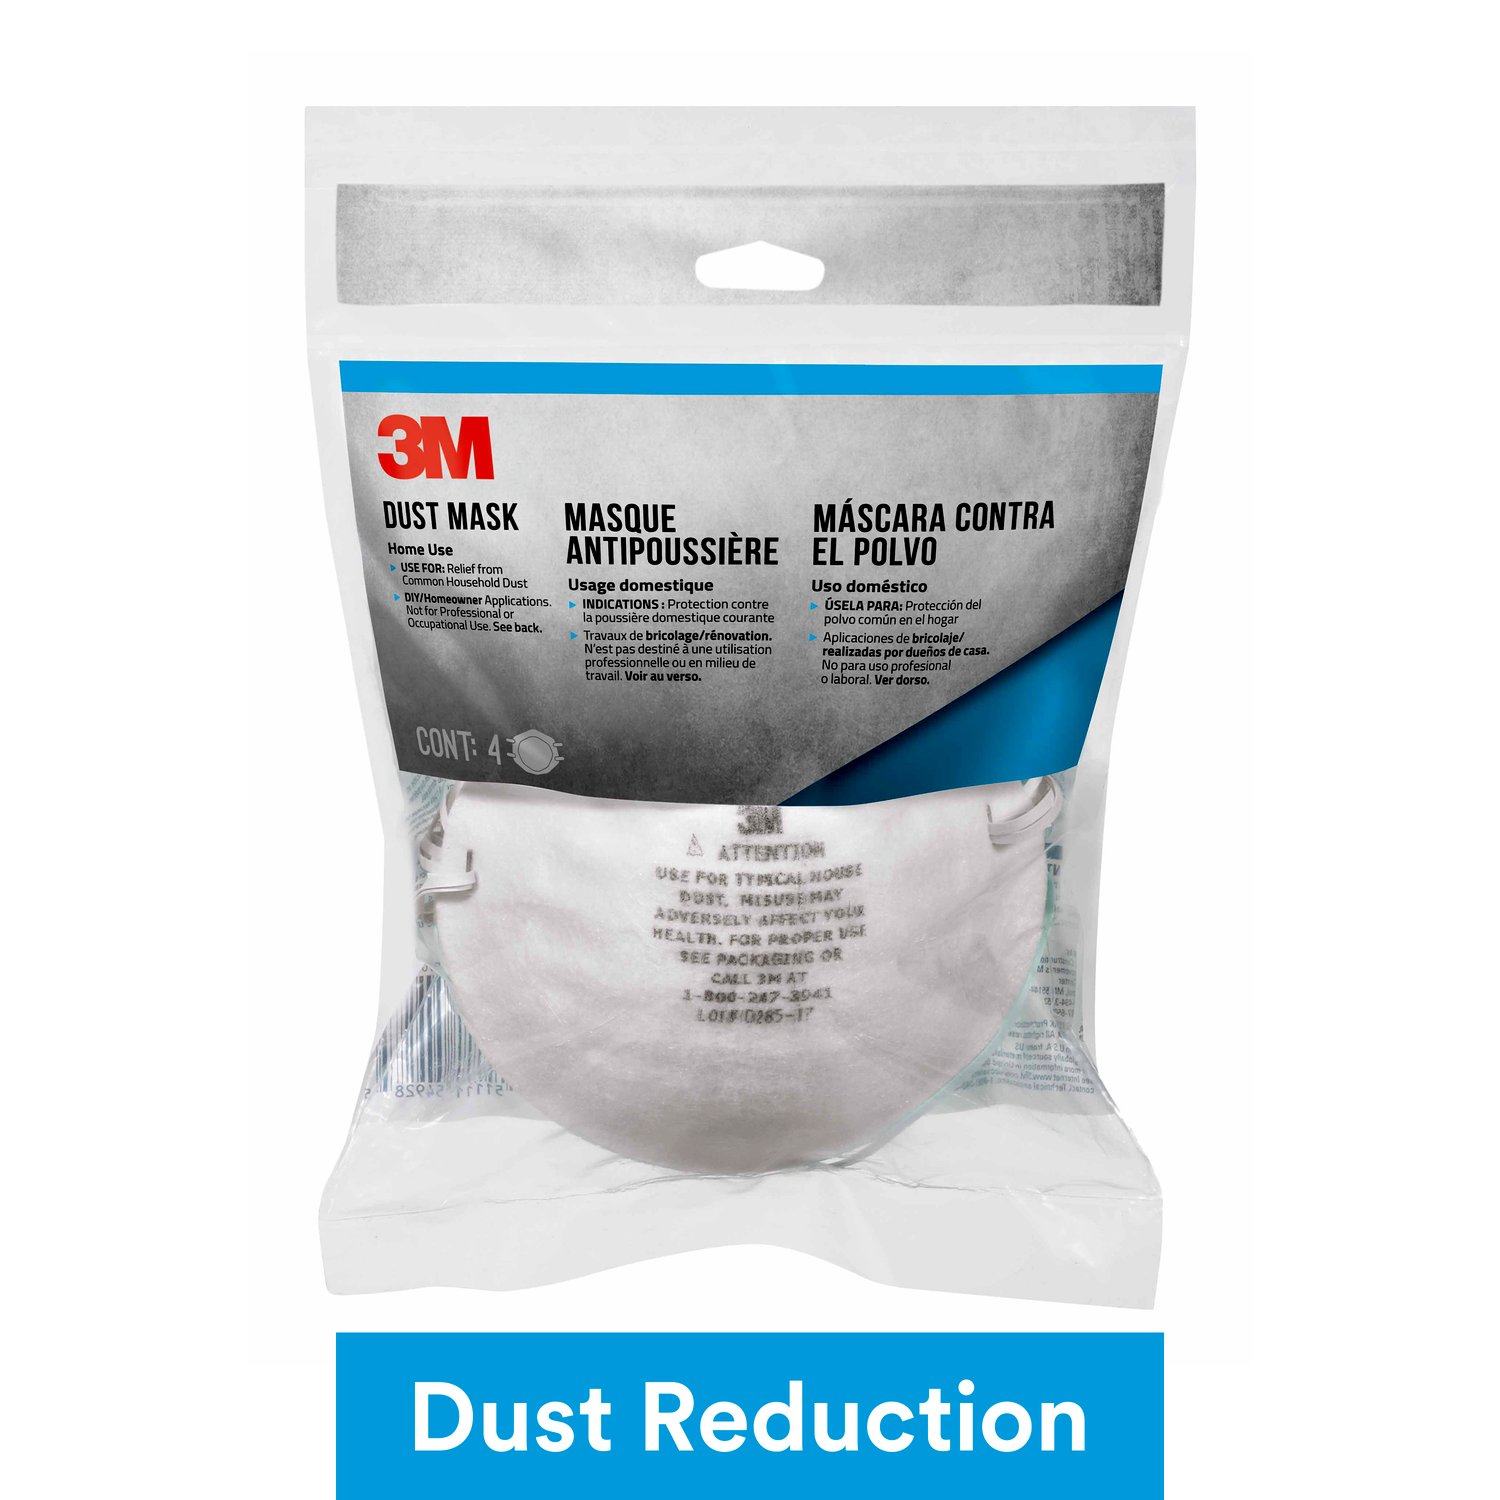 7100159312 - 3M Home Dust Mask, 8661P4-DC, 4 eaches/pack, 24 packs/case